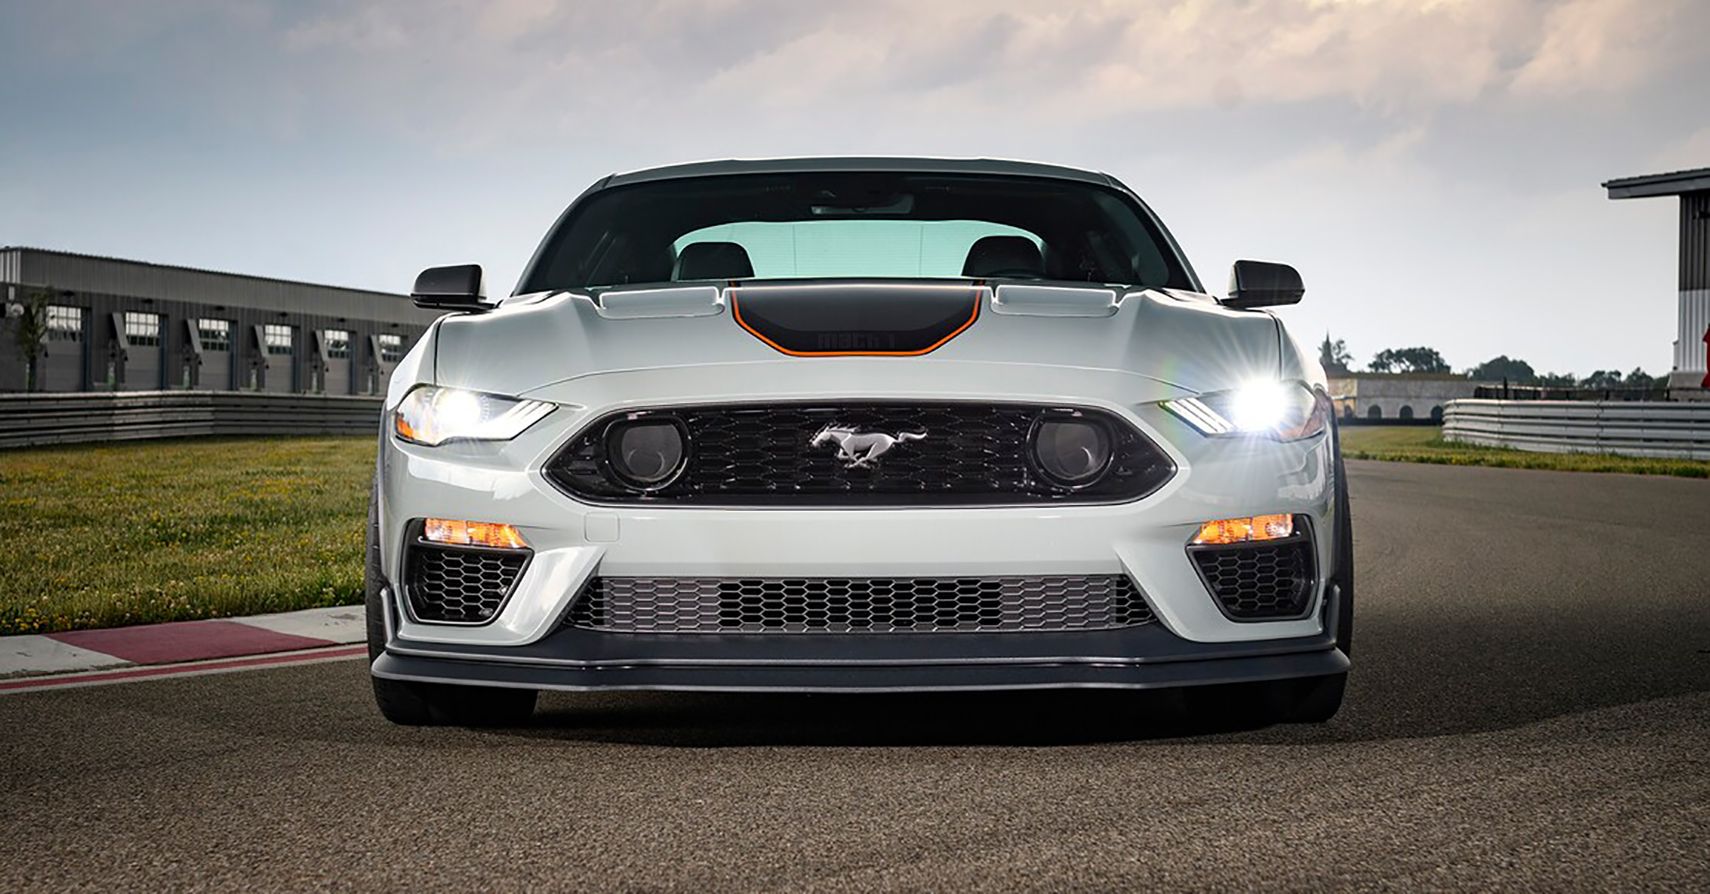 480-HP Mustang Mach 1 Is back and fits between the GT and Shelby GT500